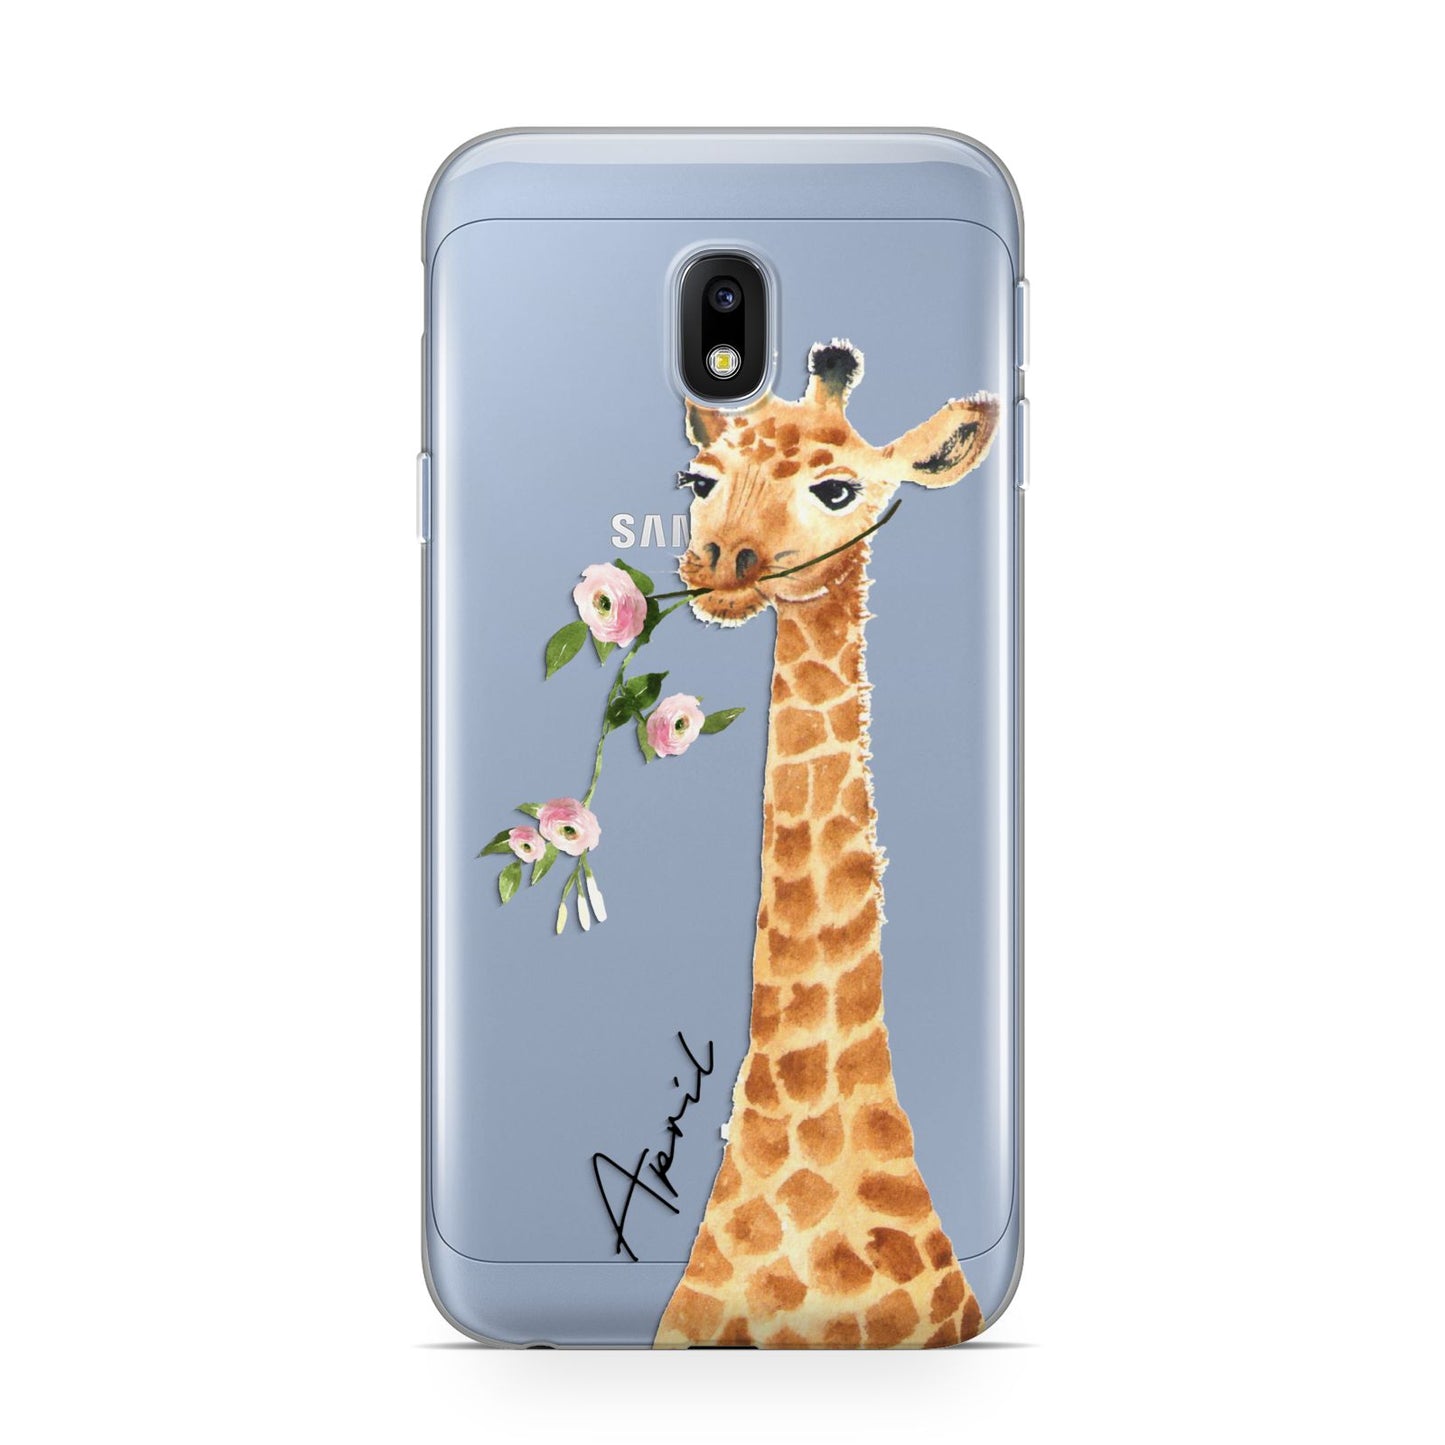 Personalised Giraffe with Name Samsung Galaxy J3 2017 Case